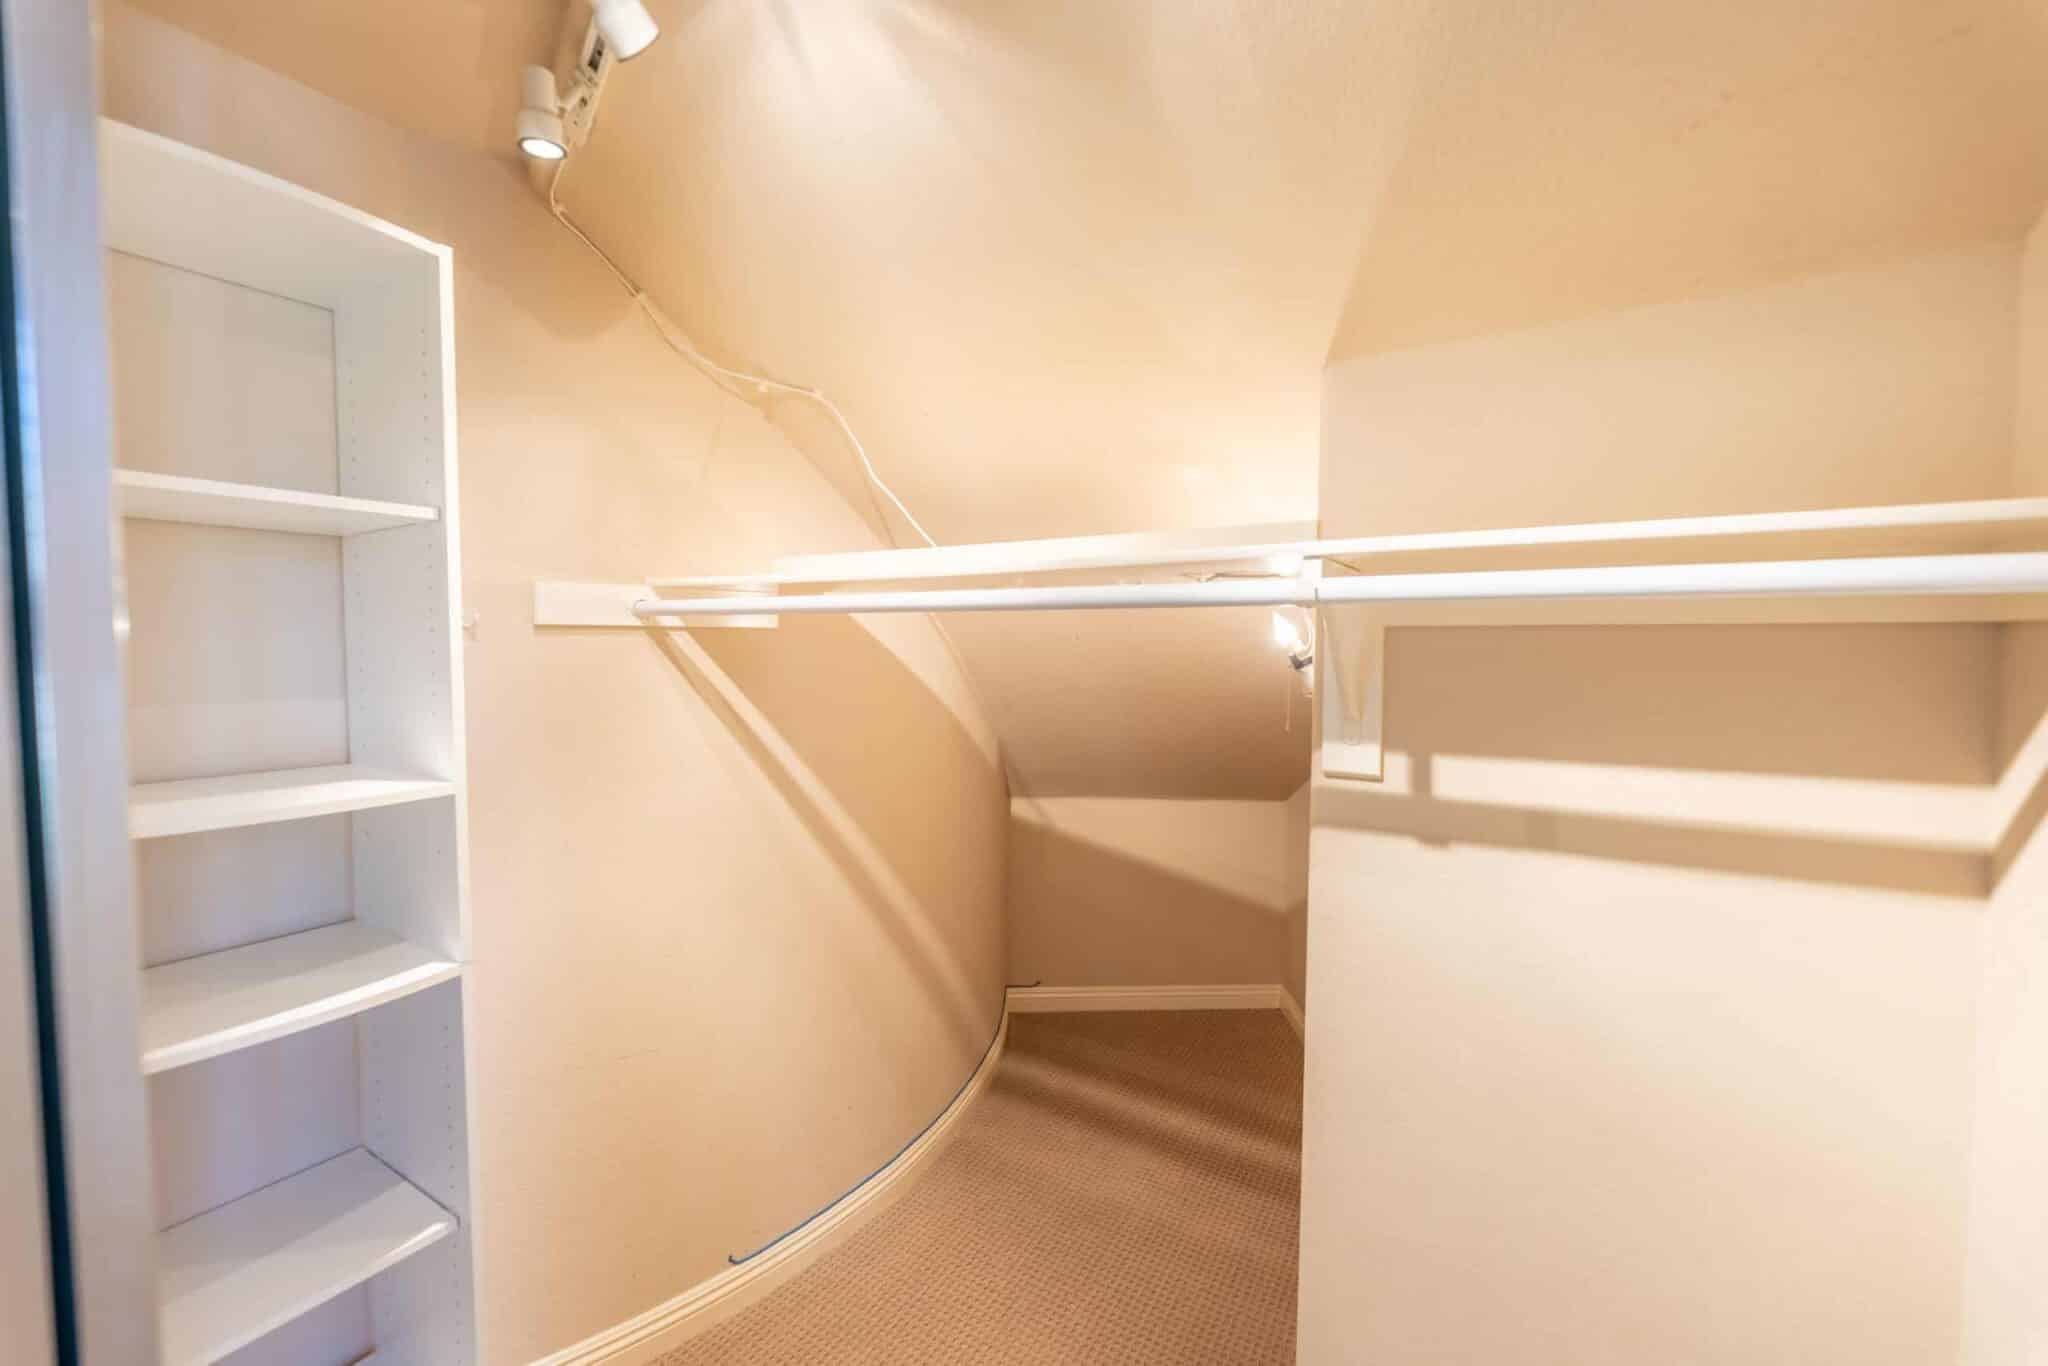 The downstairs bedroom's walk-in closet.